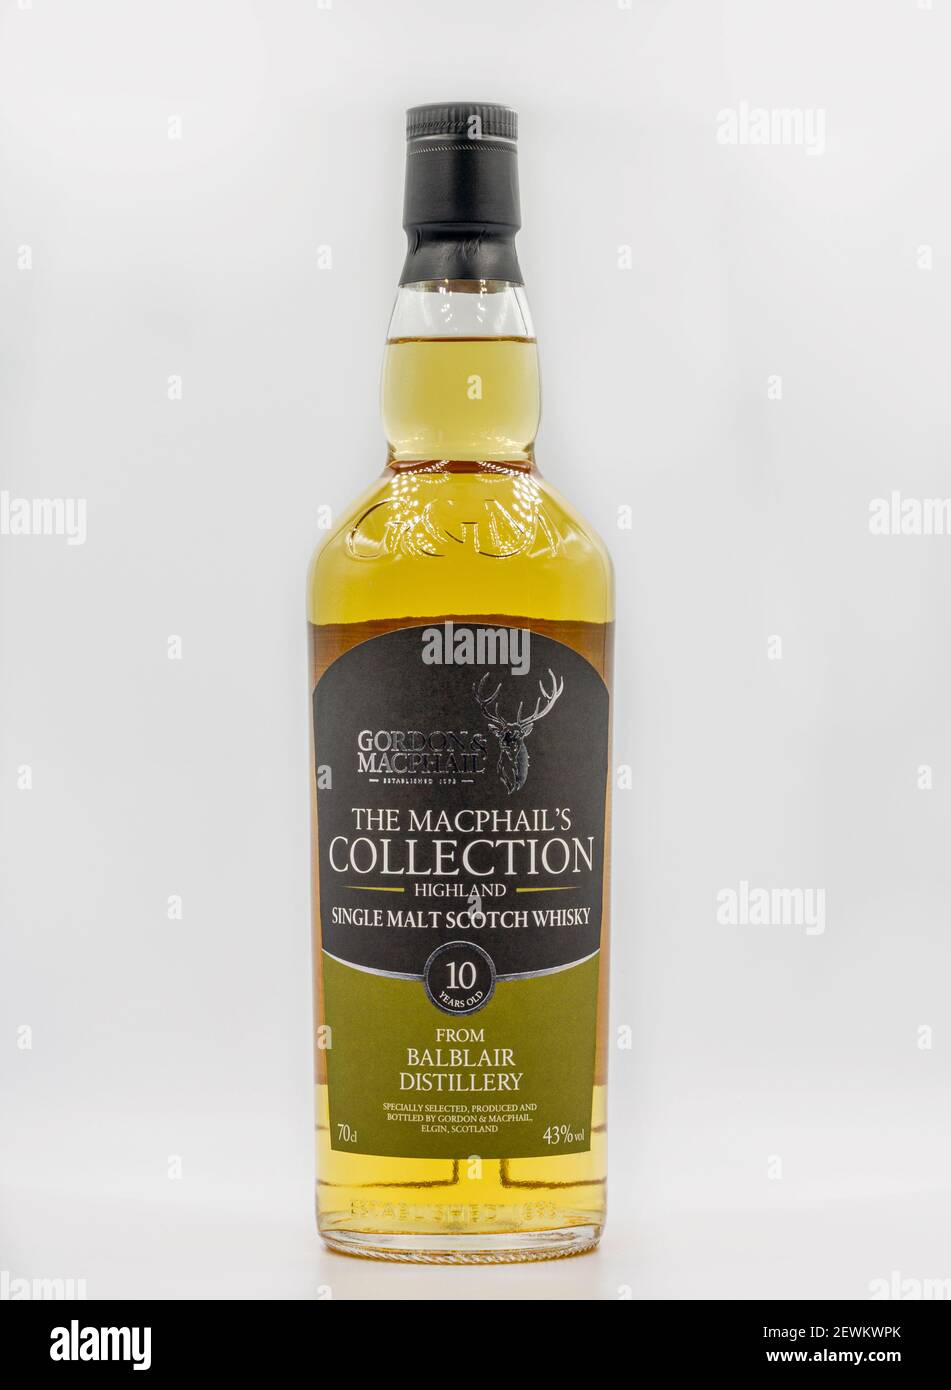 KYIV, UKRAINE - DECEMBER 17, 2020: Studio shoot of The Macphails Collection Highland Single Malt Scotch 10 years old whisky bottle closeup against whi Stock Photo